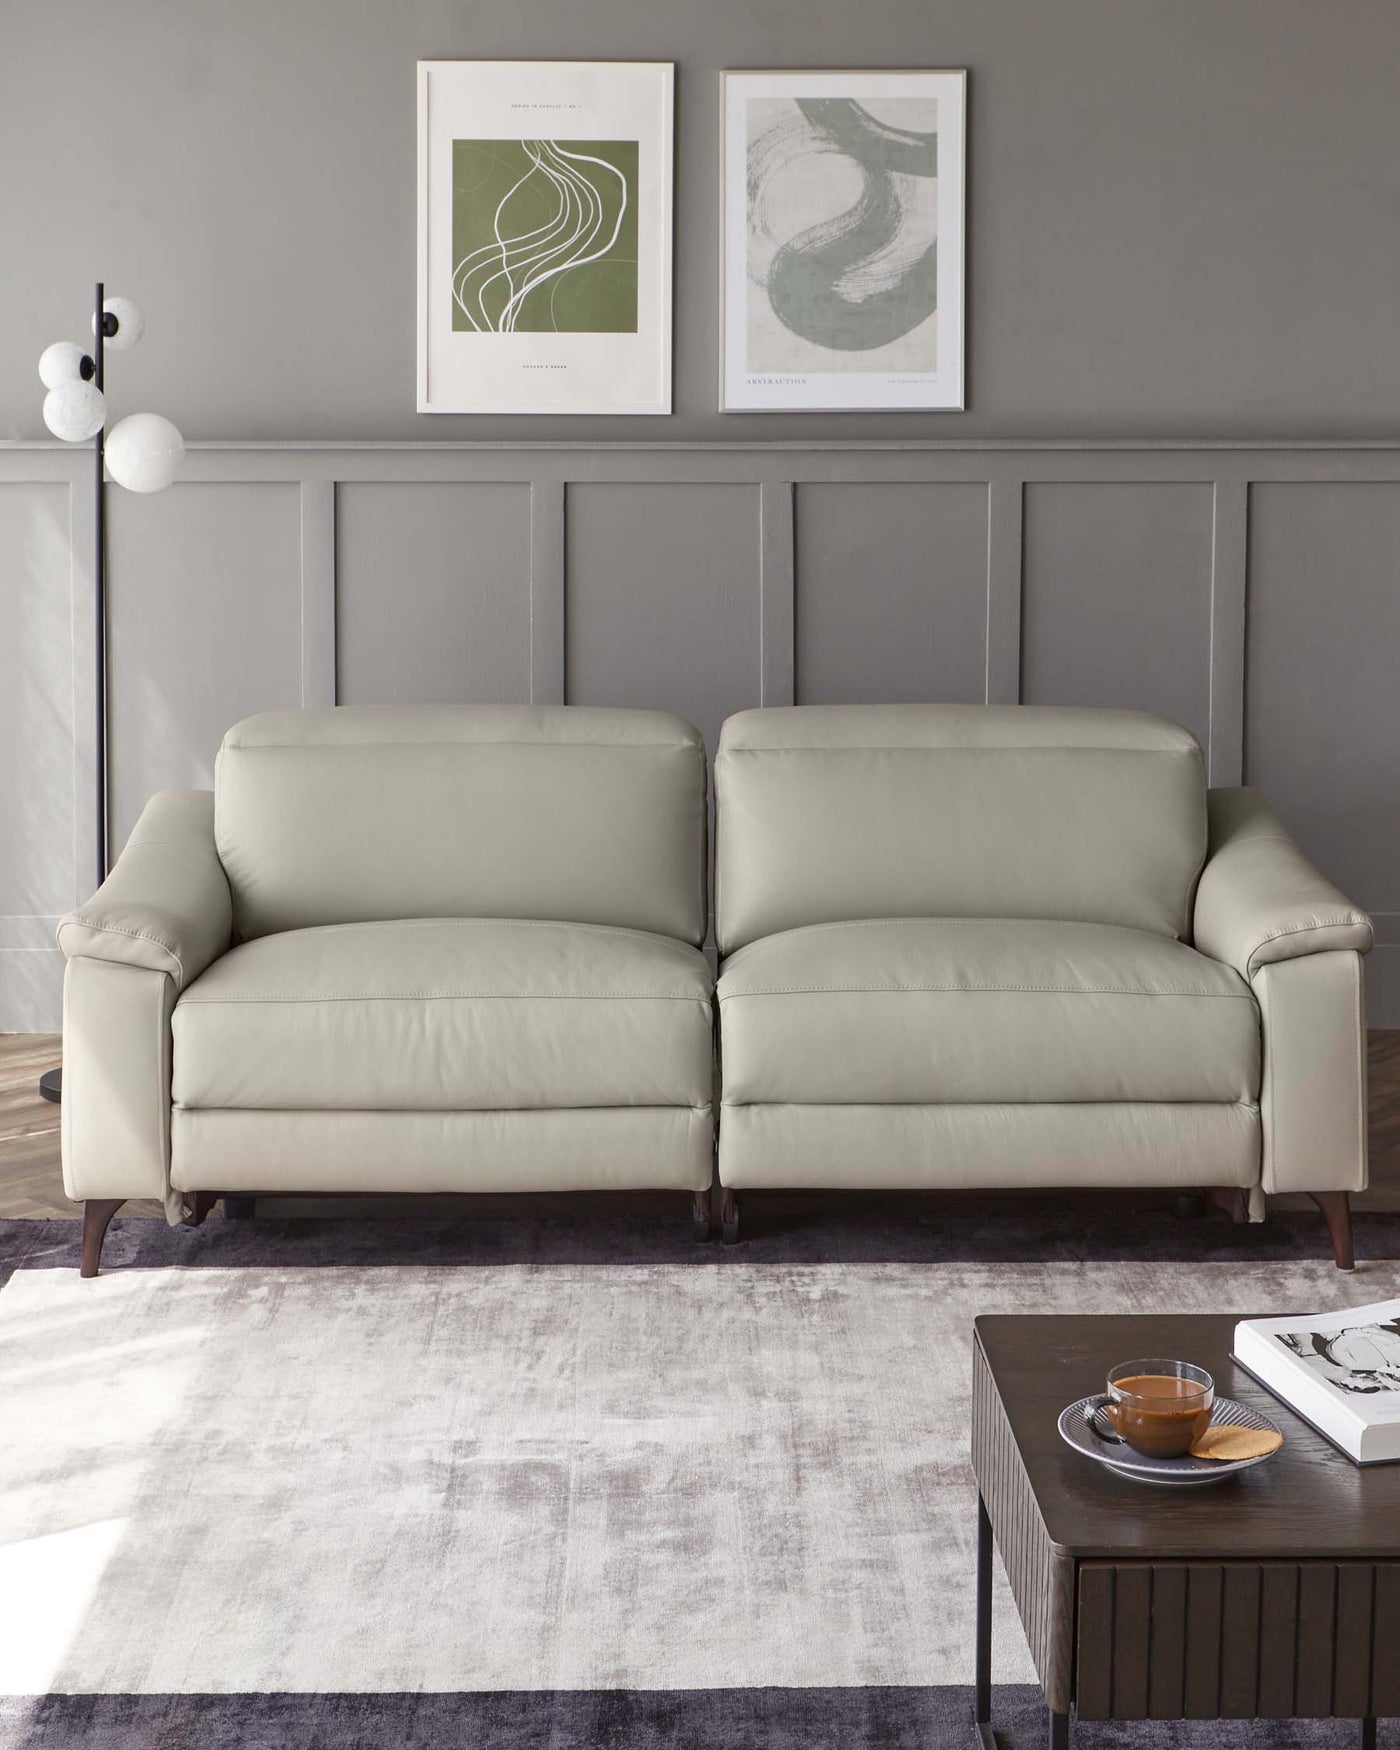 Elegant beige upholstered three-seater sofa with cushioned arms and dark wooden legs, paired with a dark wooden coffee table featuring a glass teapot and cup on top, set on a textured grey area rug.